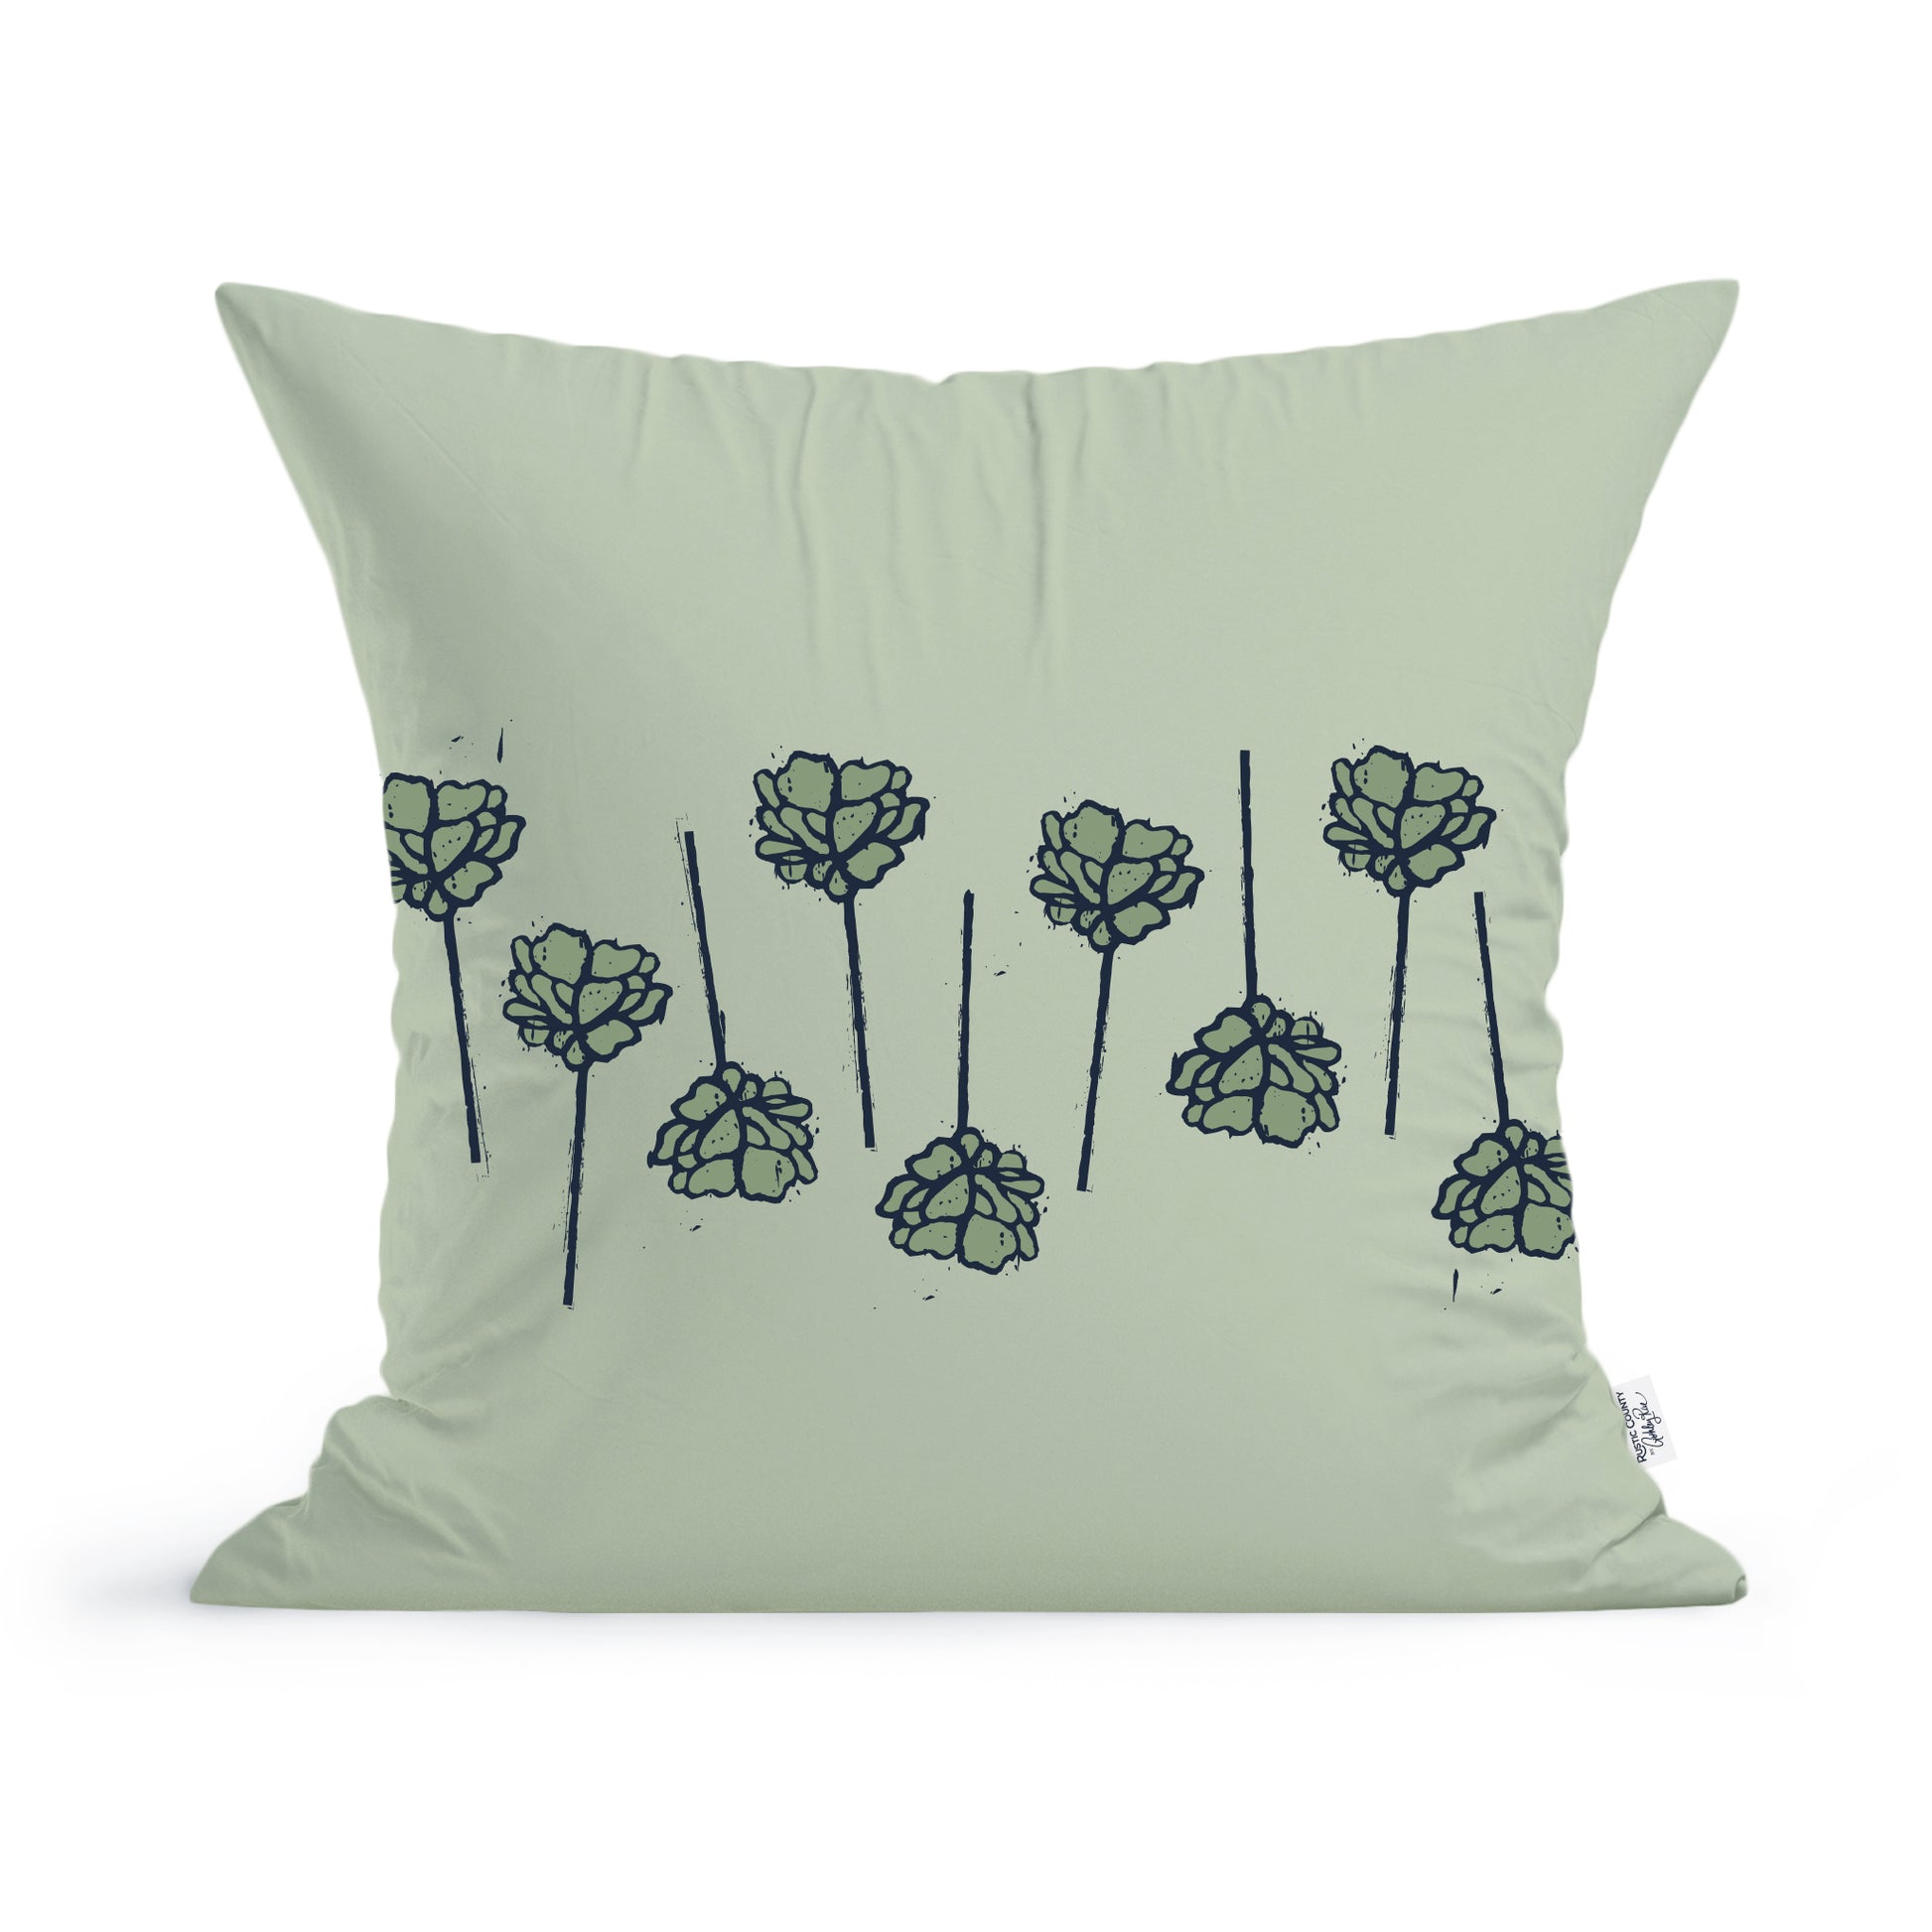 Fresh Florals Pillow by Rustic County, a light green square cotton pillow with a simple black line art design of seven flowers scattered across the front.